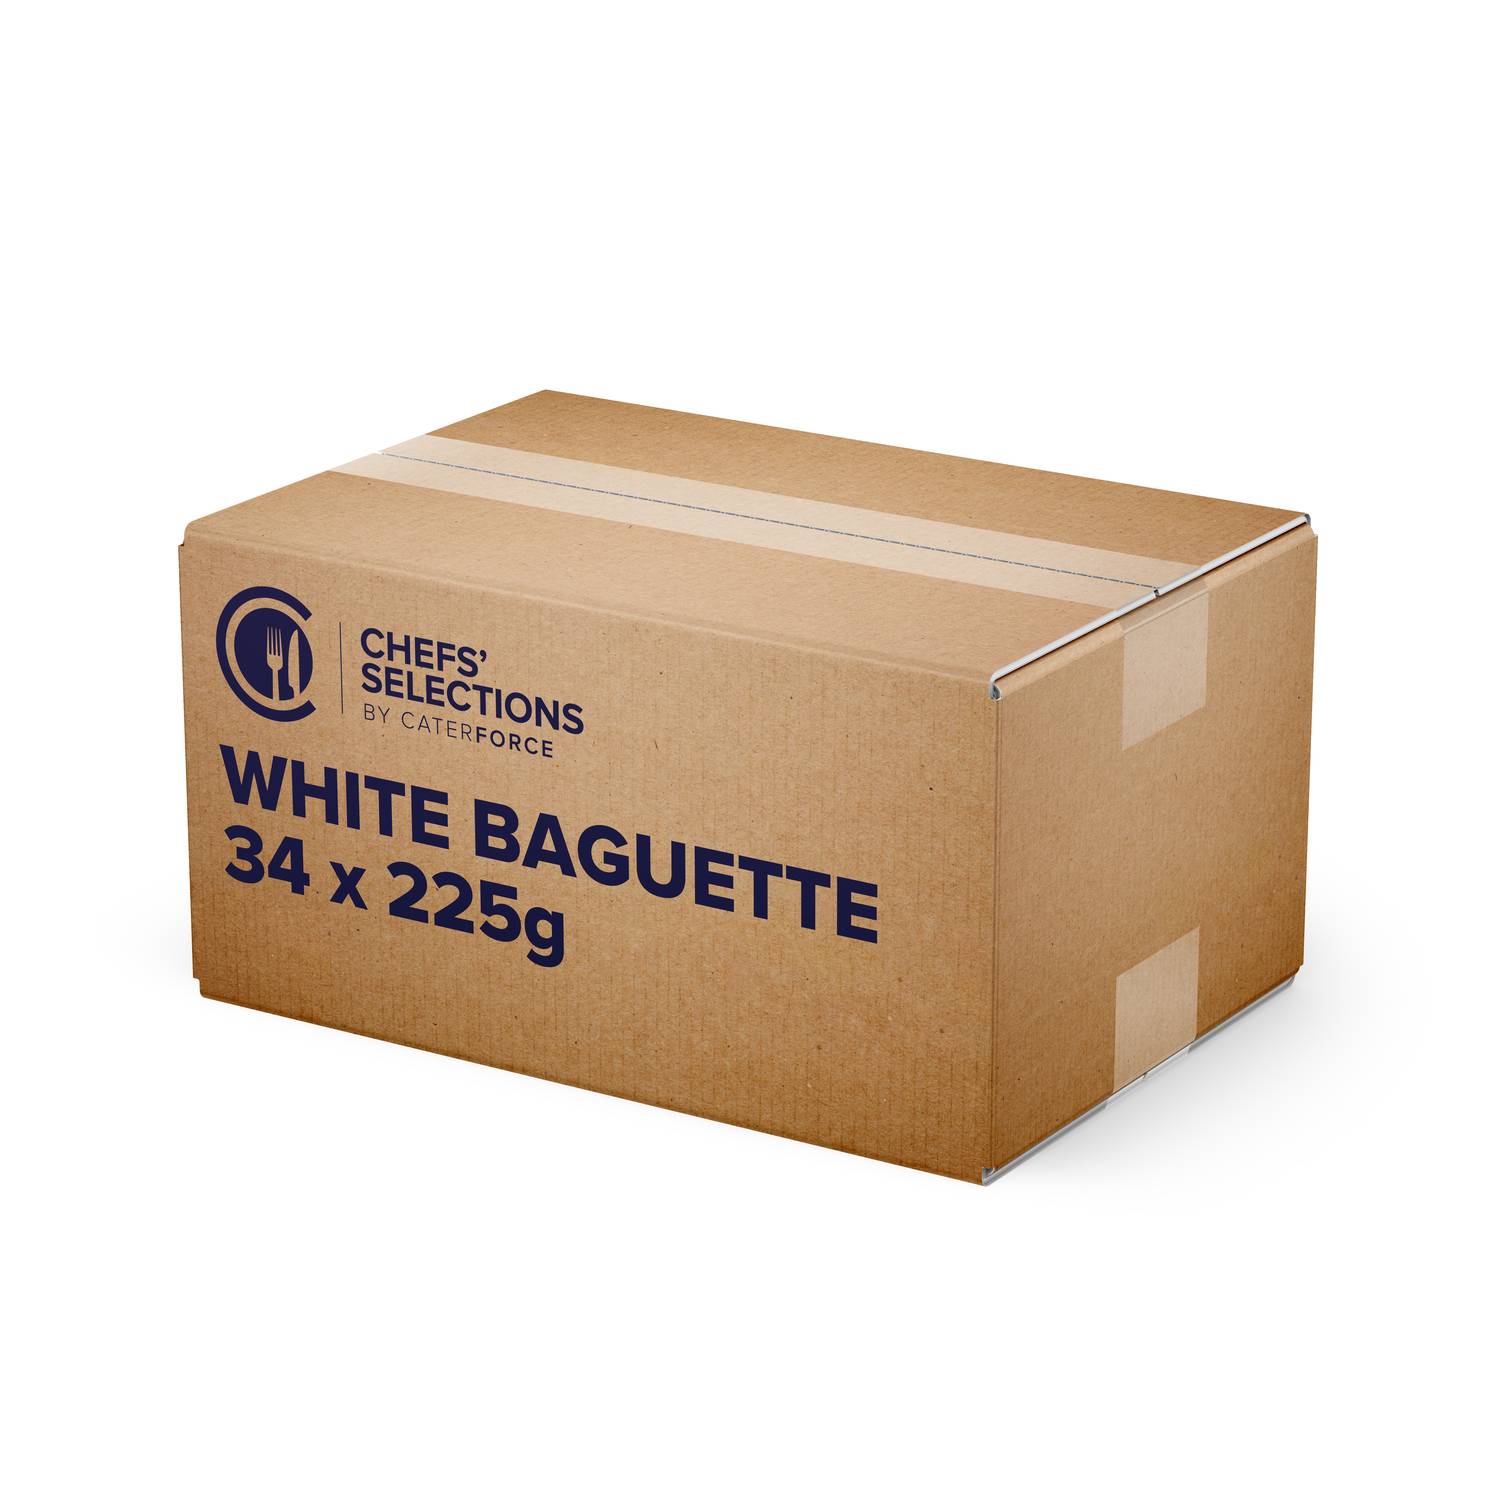 Chefs’ Selections White Baguettes (34 x 225g)